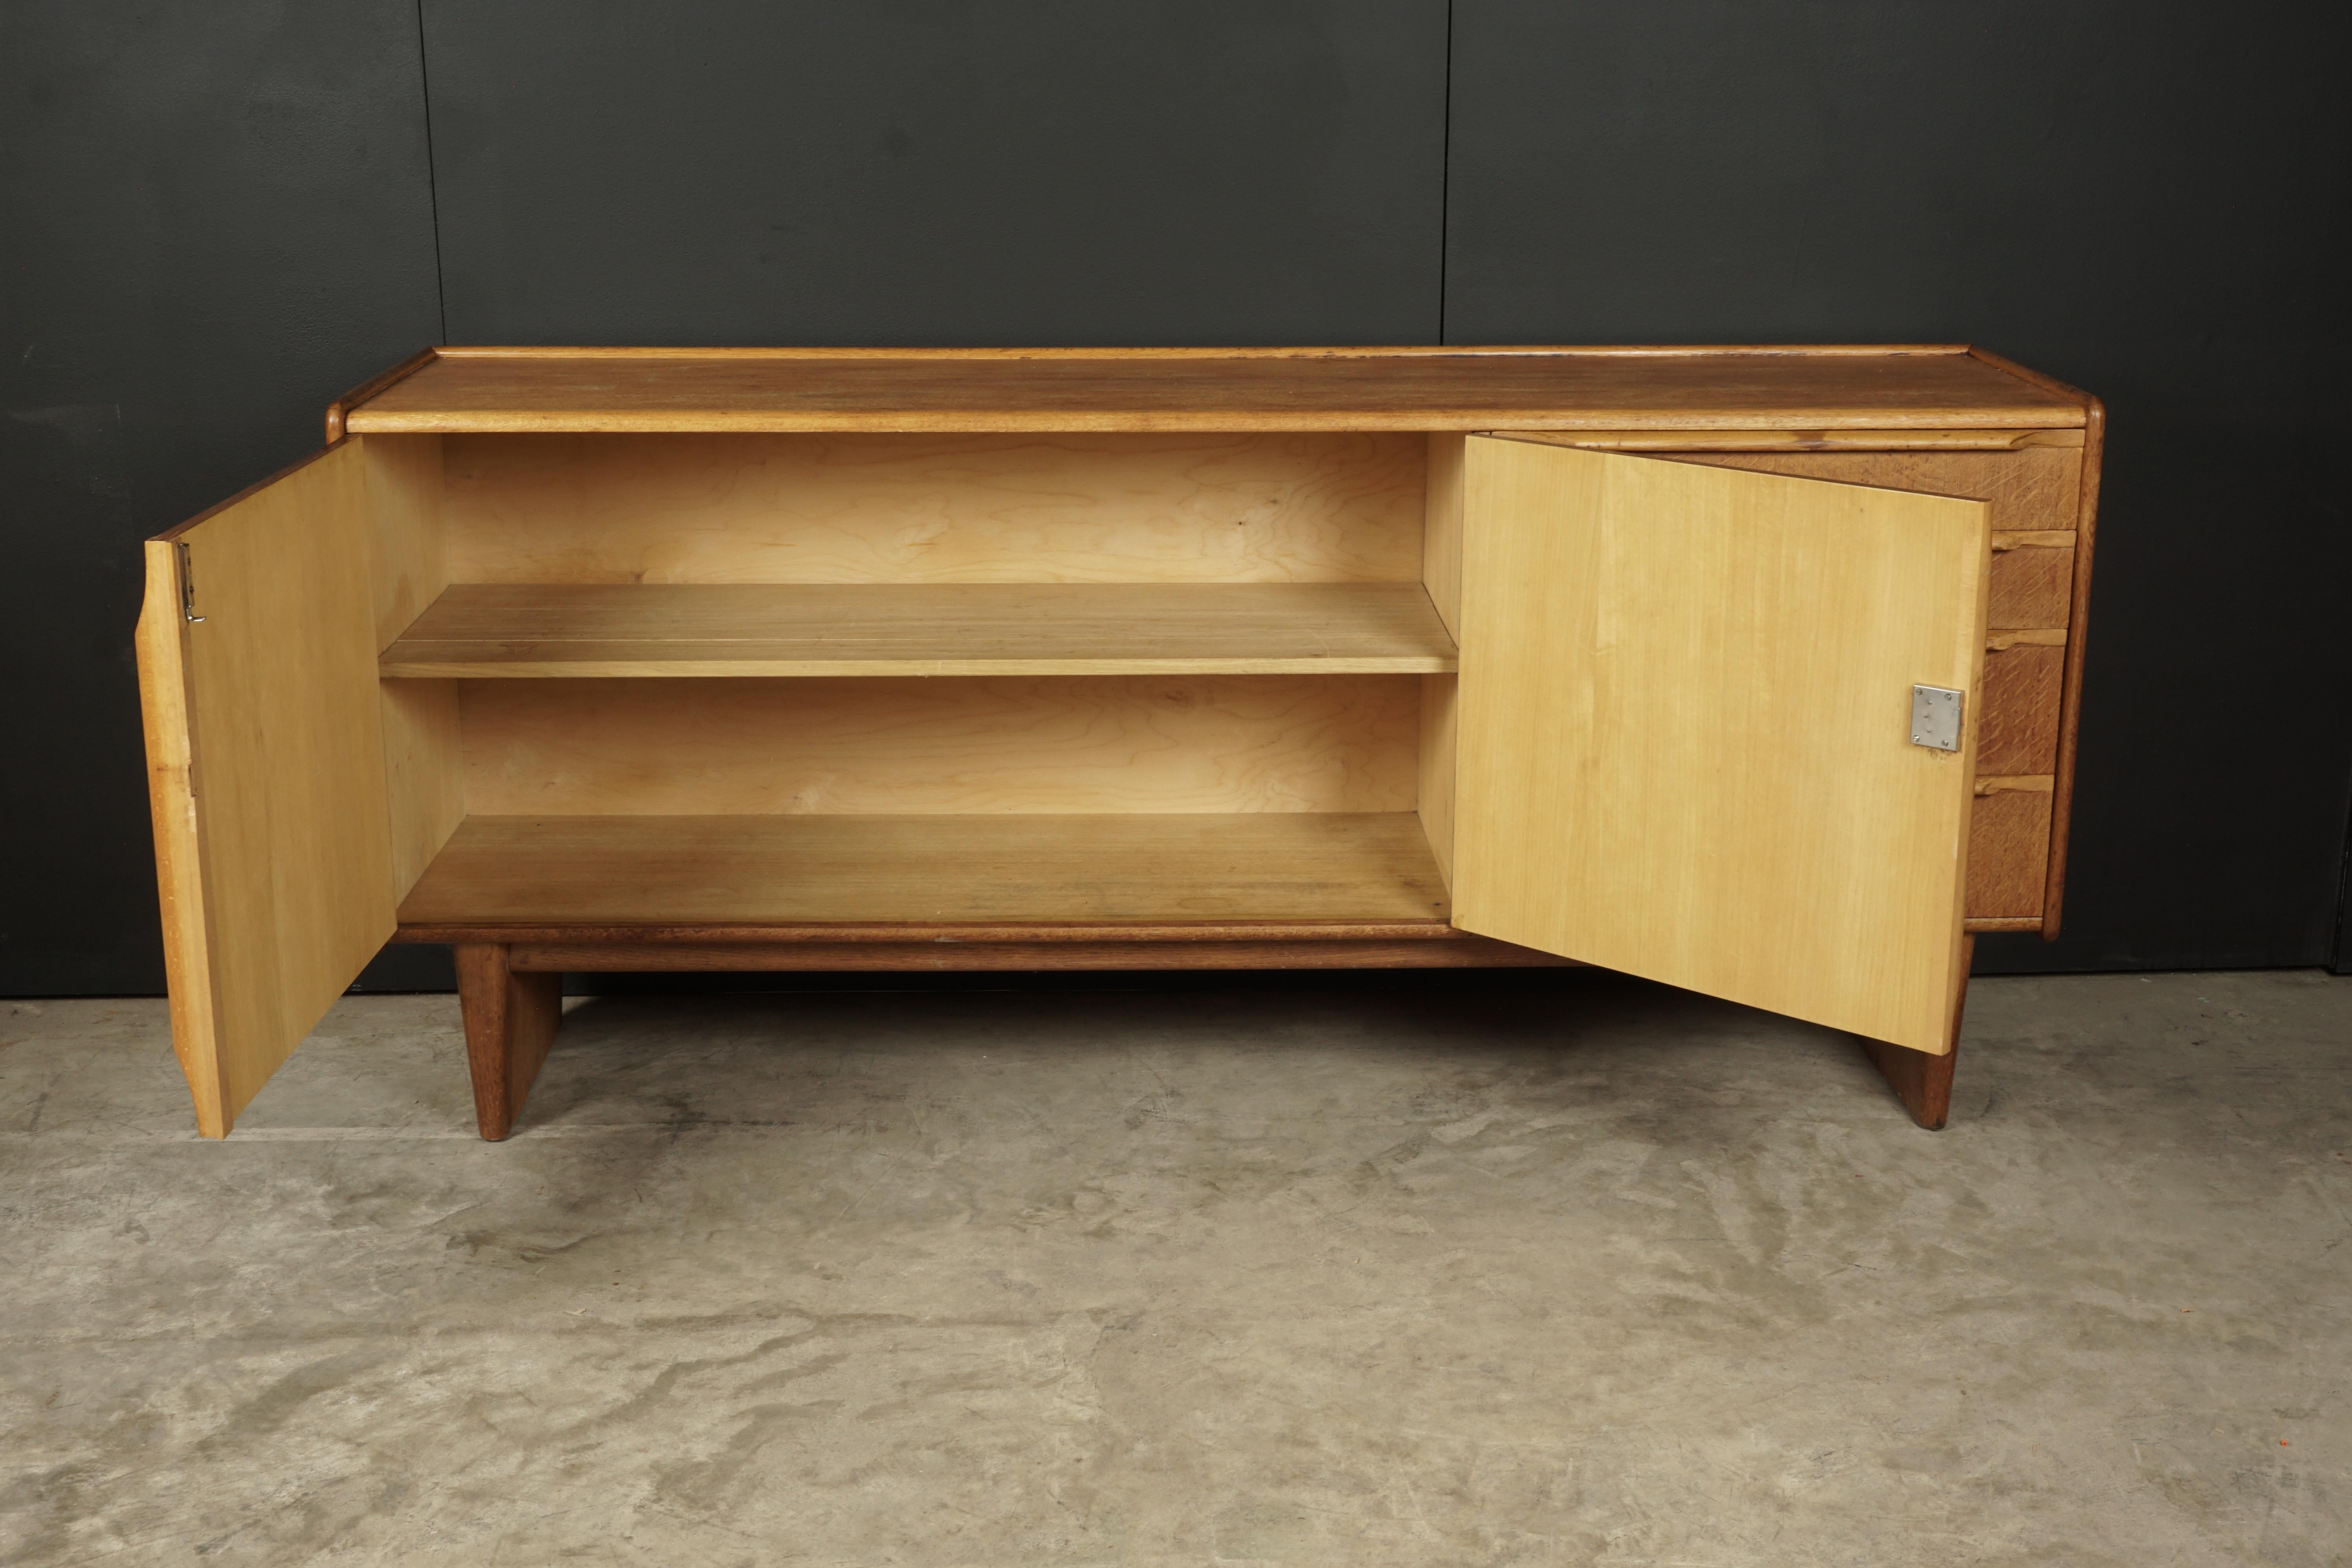 Early Cees Braakman sideboard in oak, circa 1960. Rare model in solid oak construction. Manufactured for Pastoe, Netherlands. Key included.